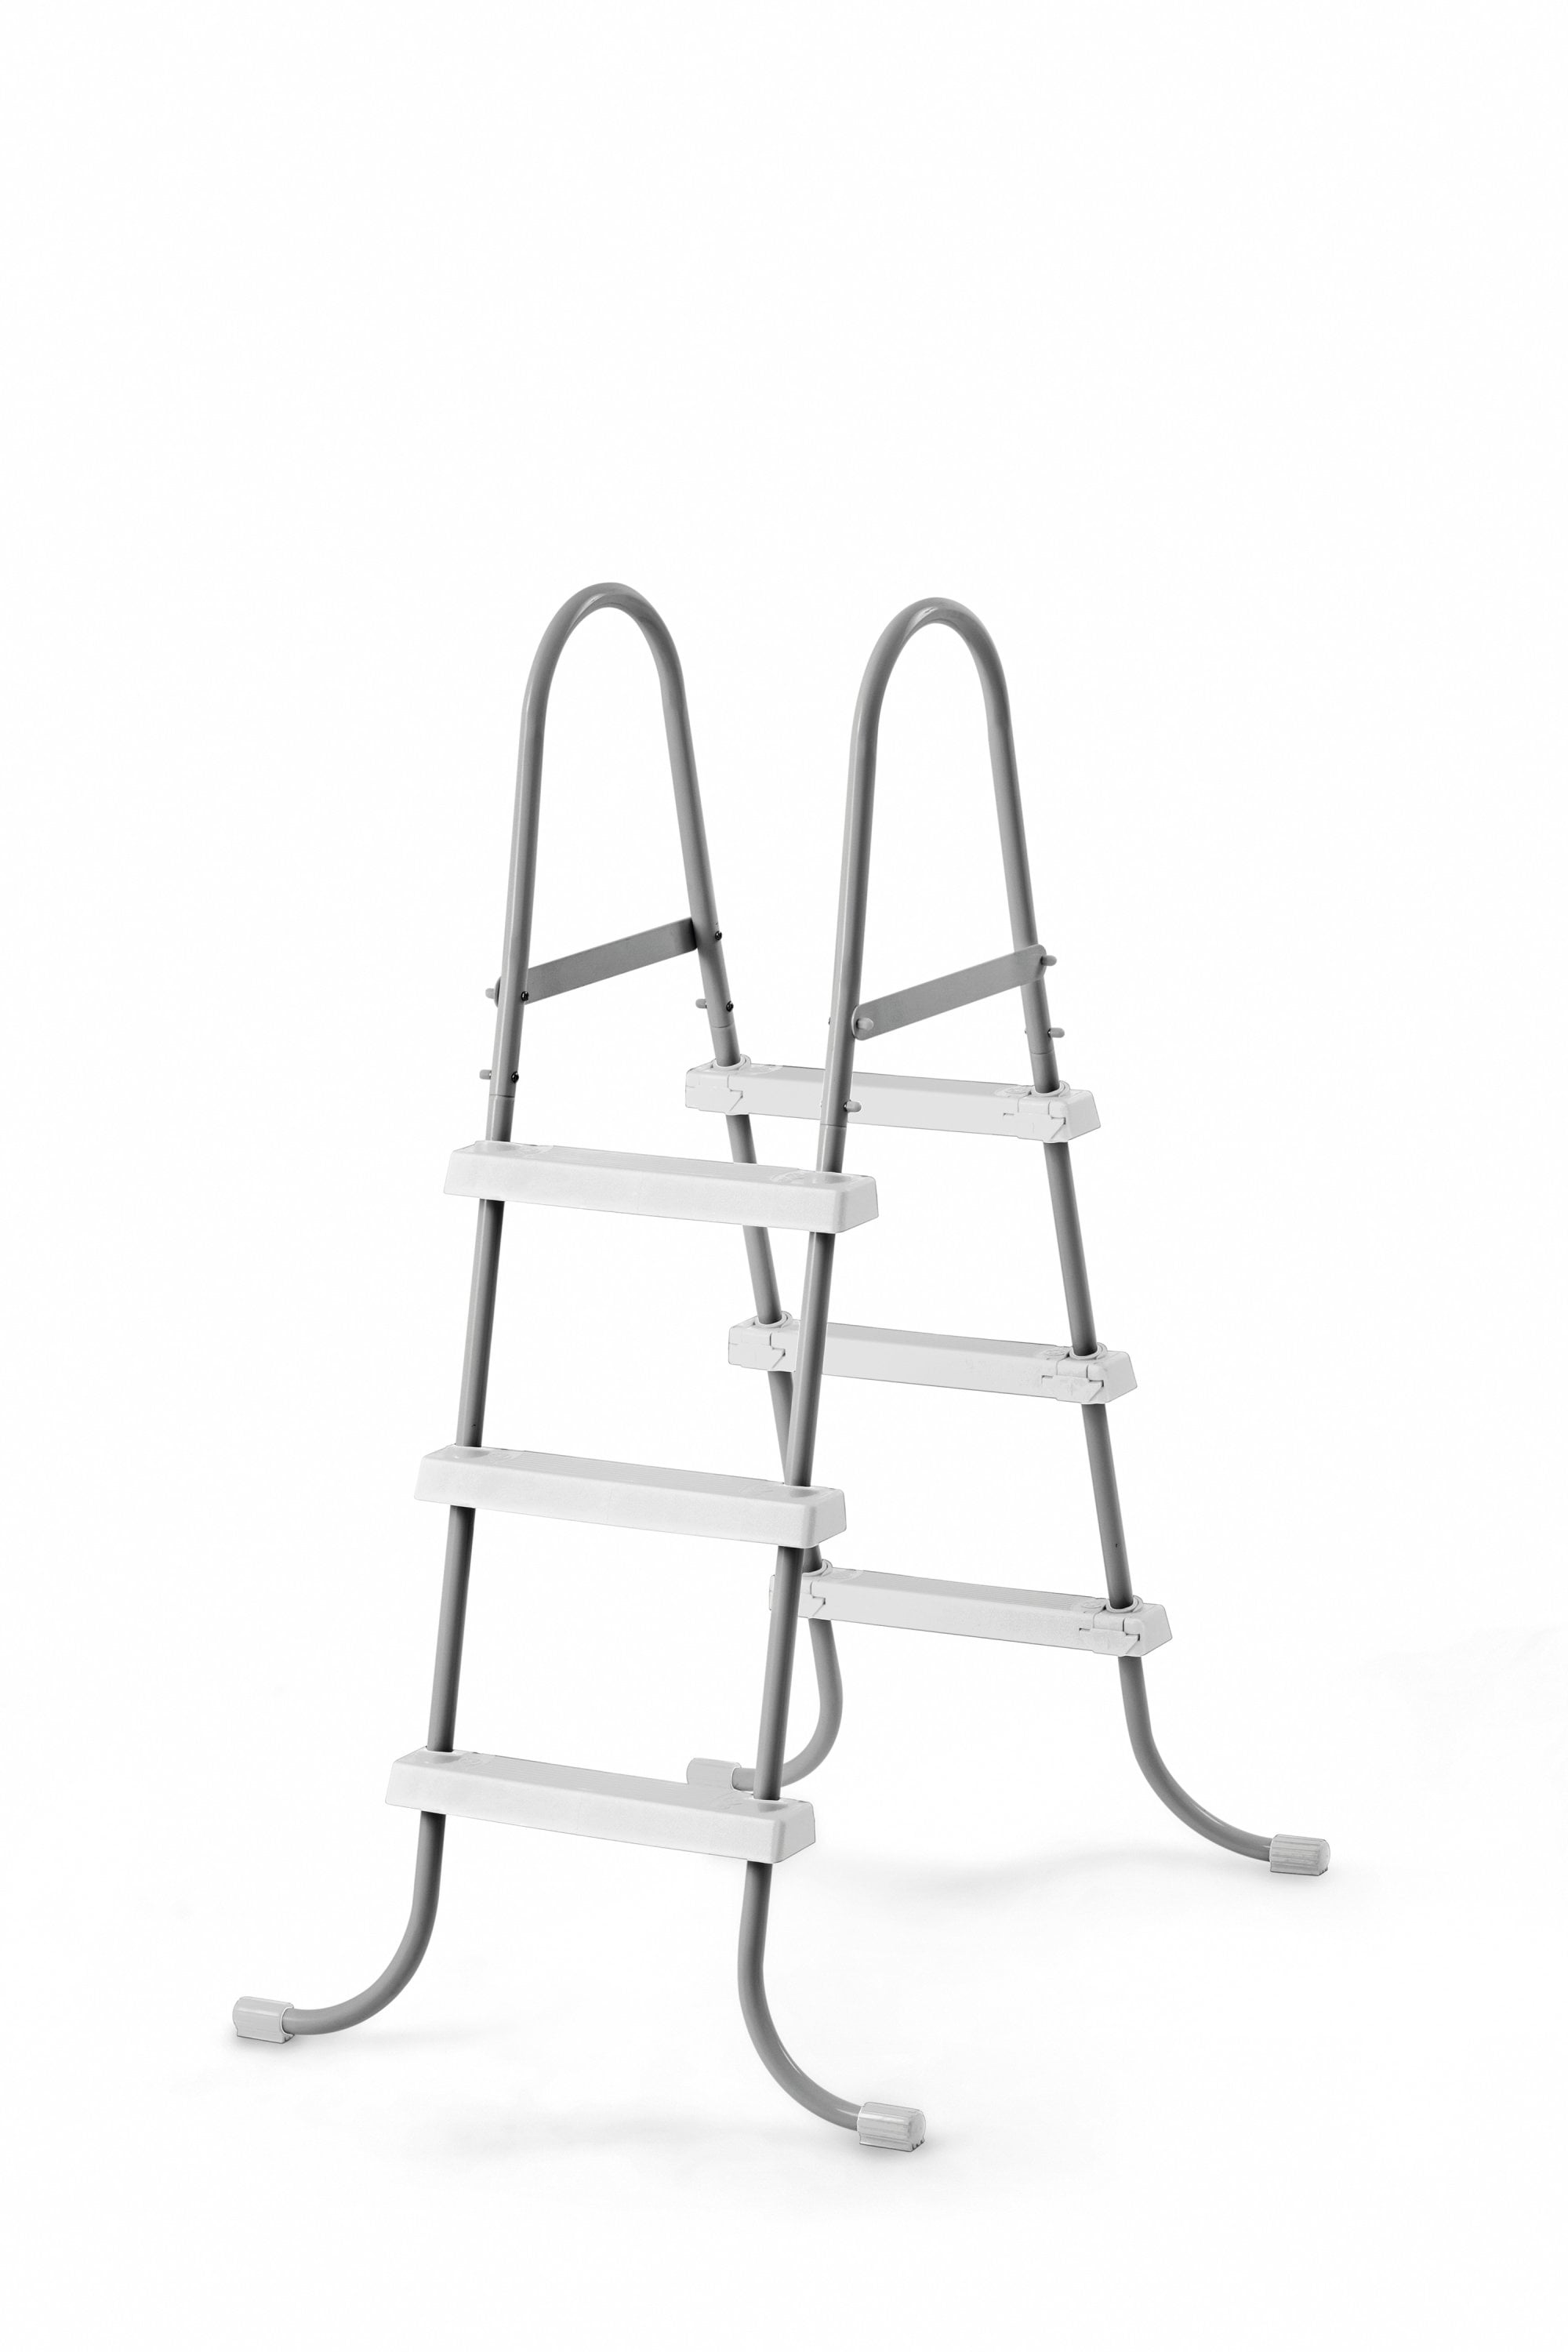 Intex 28066E Above Ground Pool Ladder for 48" Wall Height